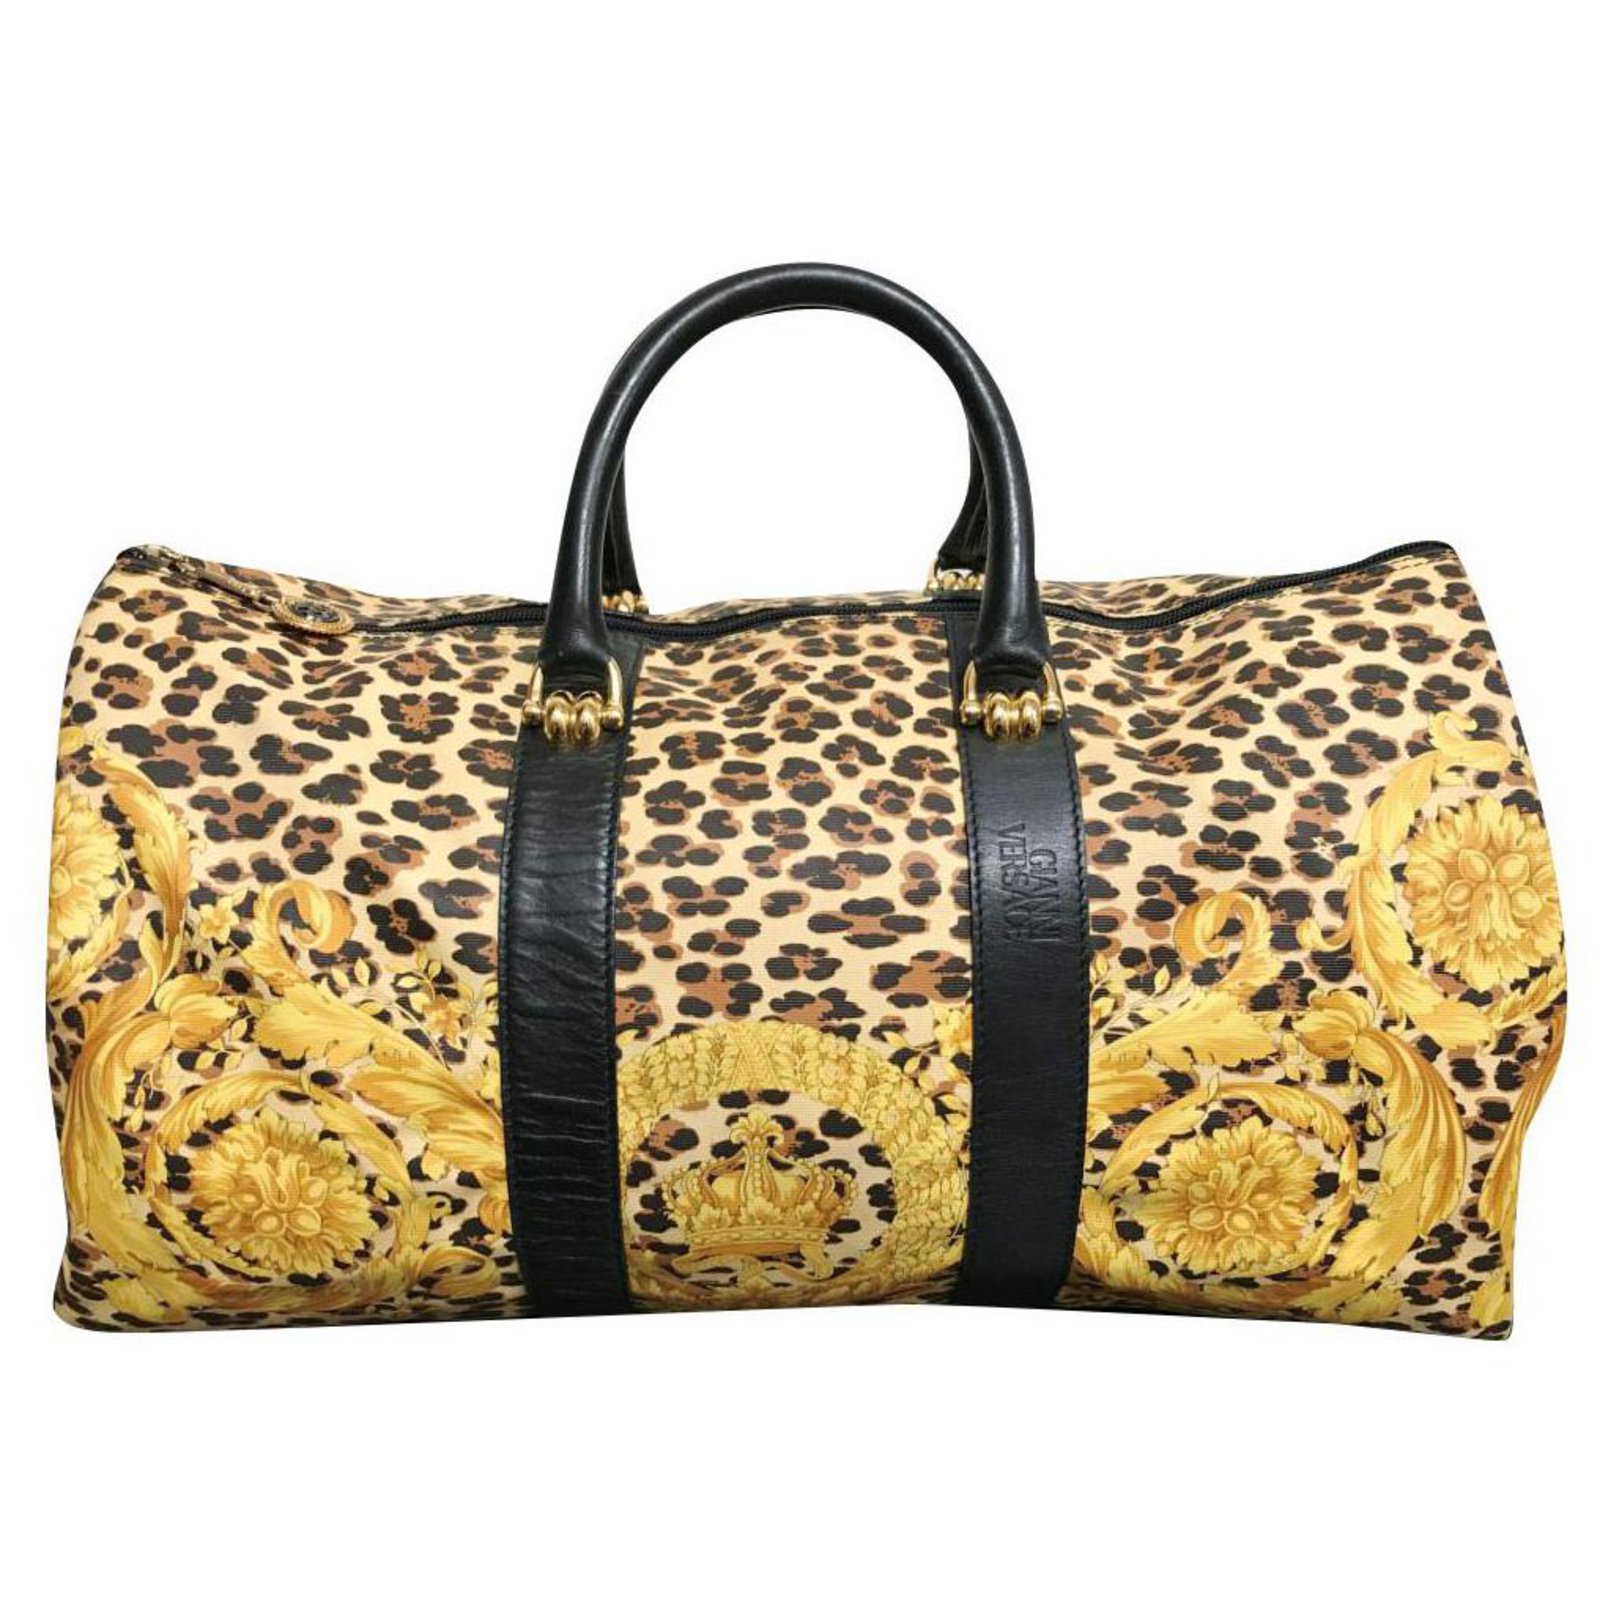 T - trolley - Gianni Versace bag NGN20,000 (Exclusive of delivery